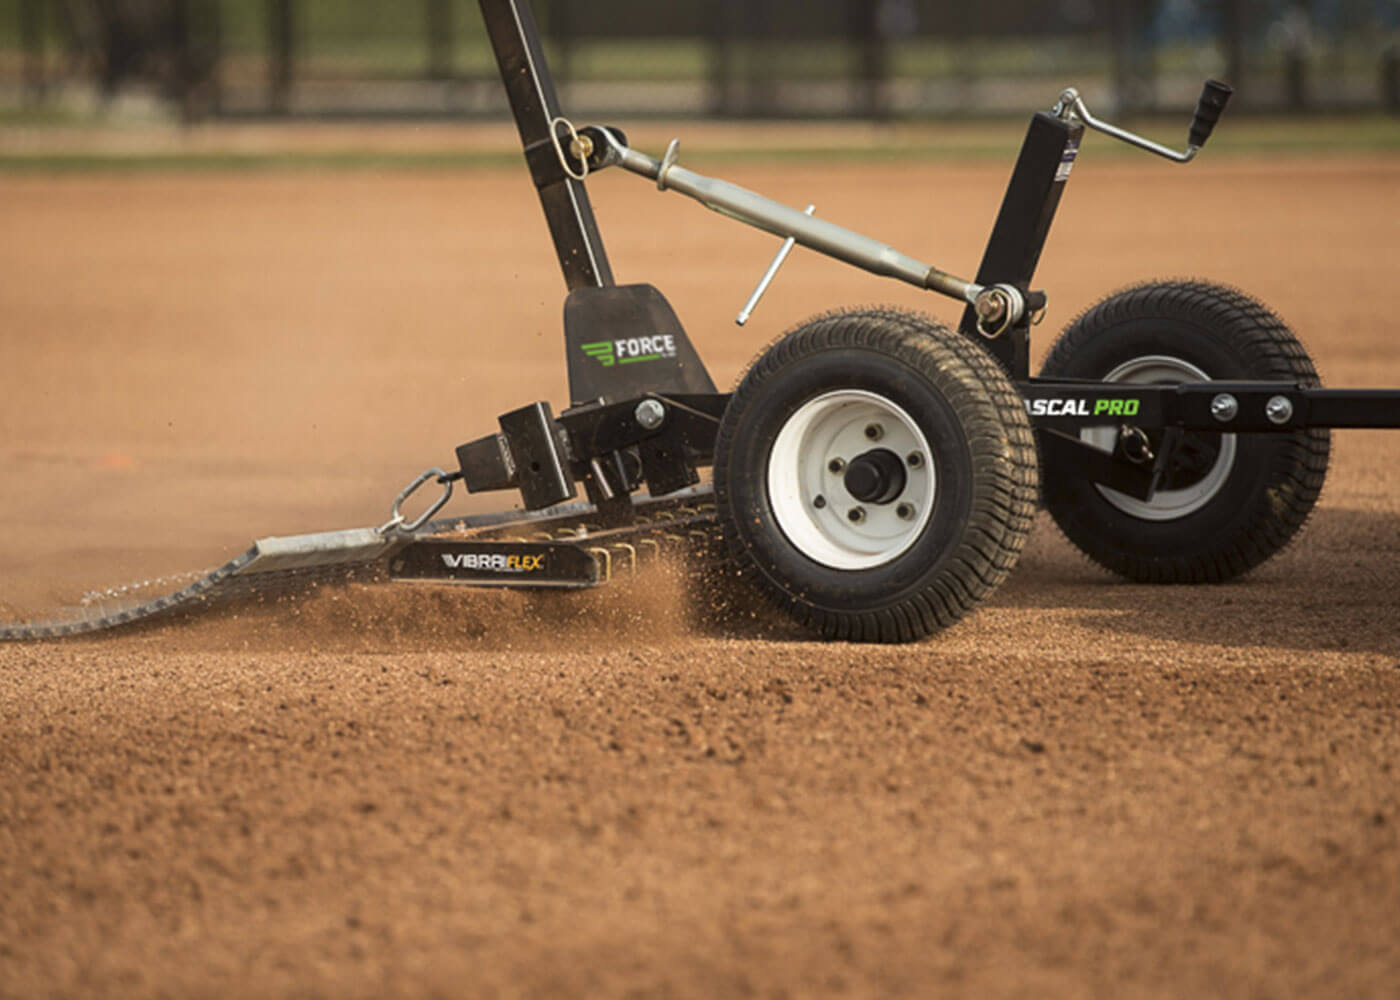 Force infield rascal pro grooming infield 